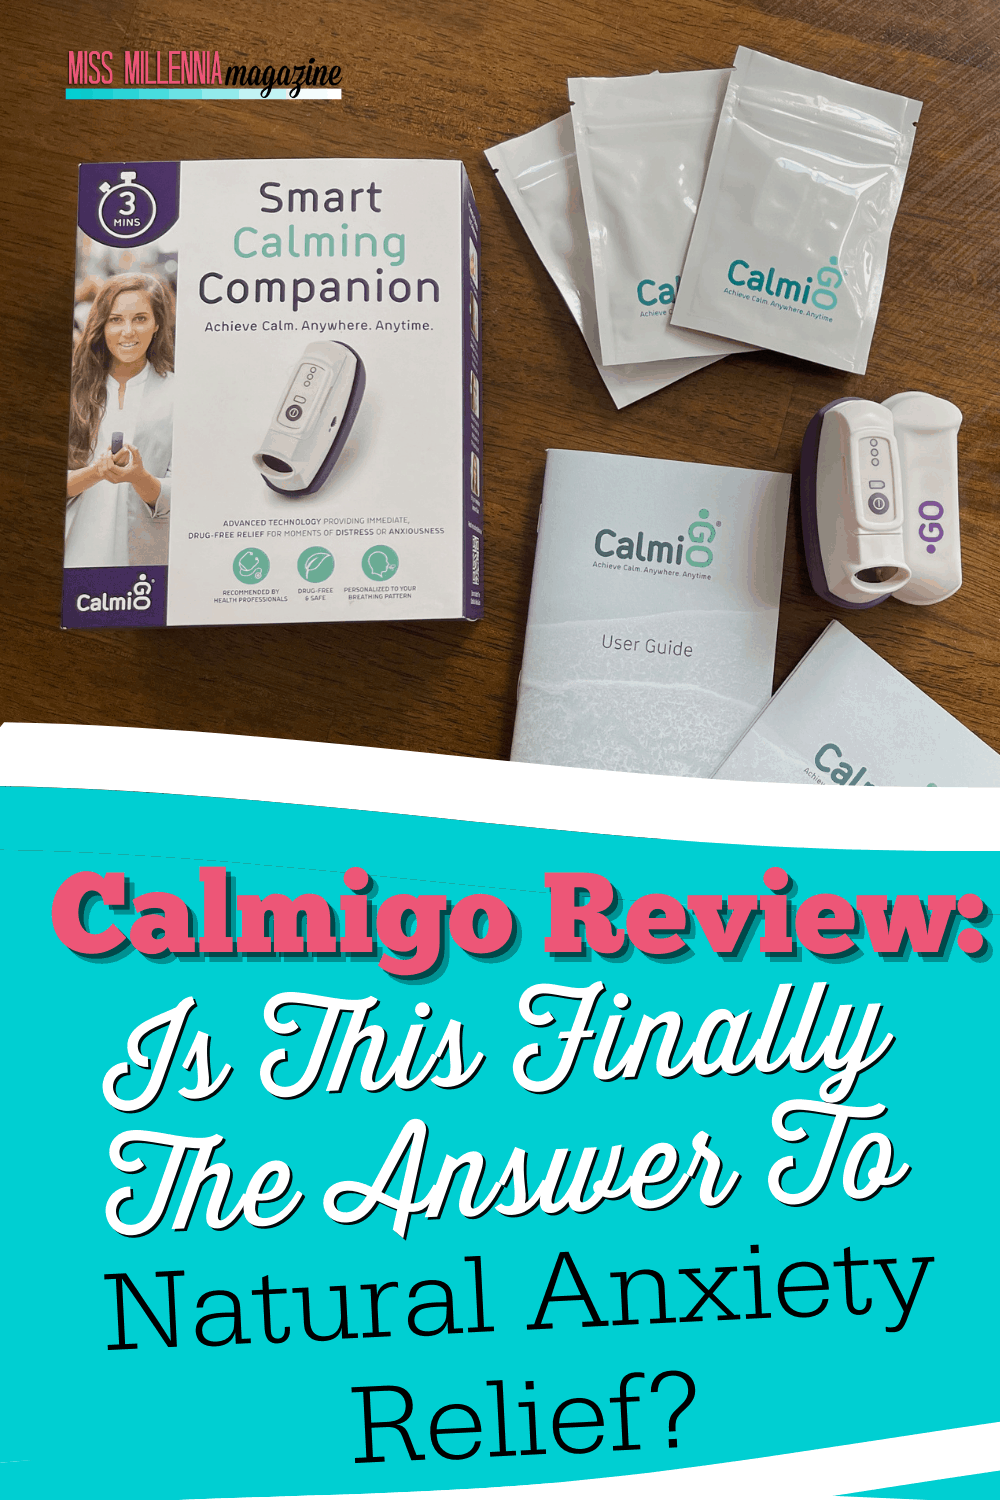 Calmigo Review Is This Finally The Answer To Natural Anxiety Relief?